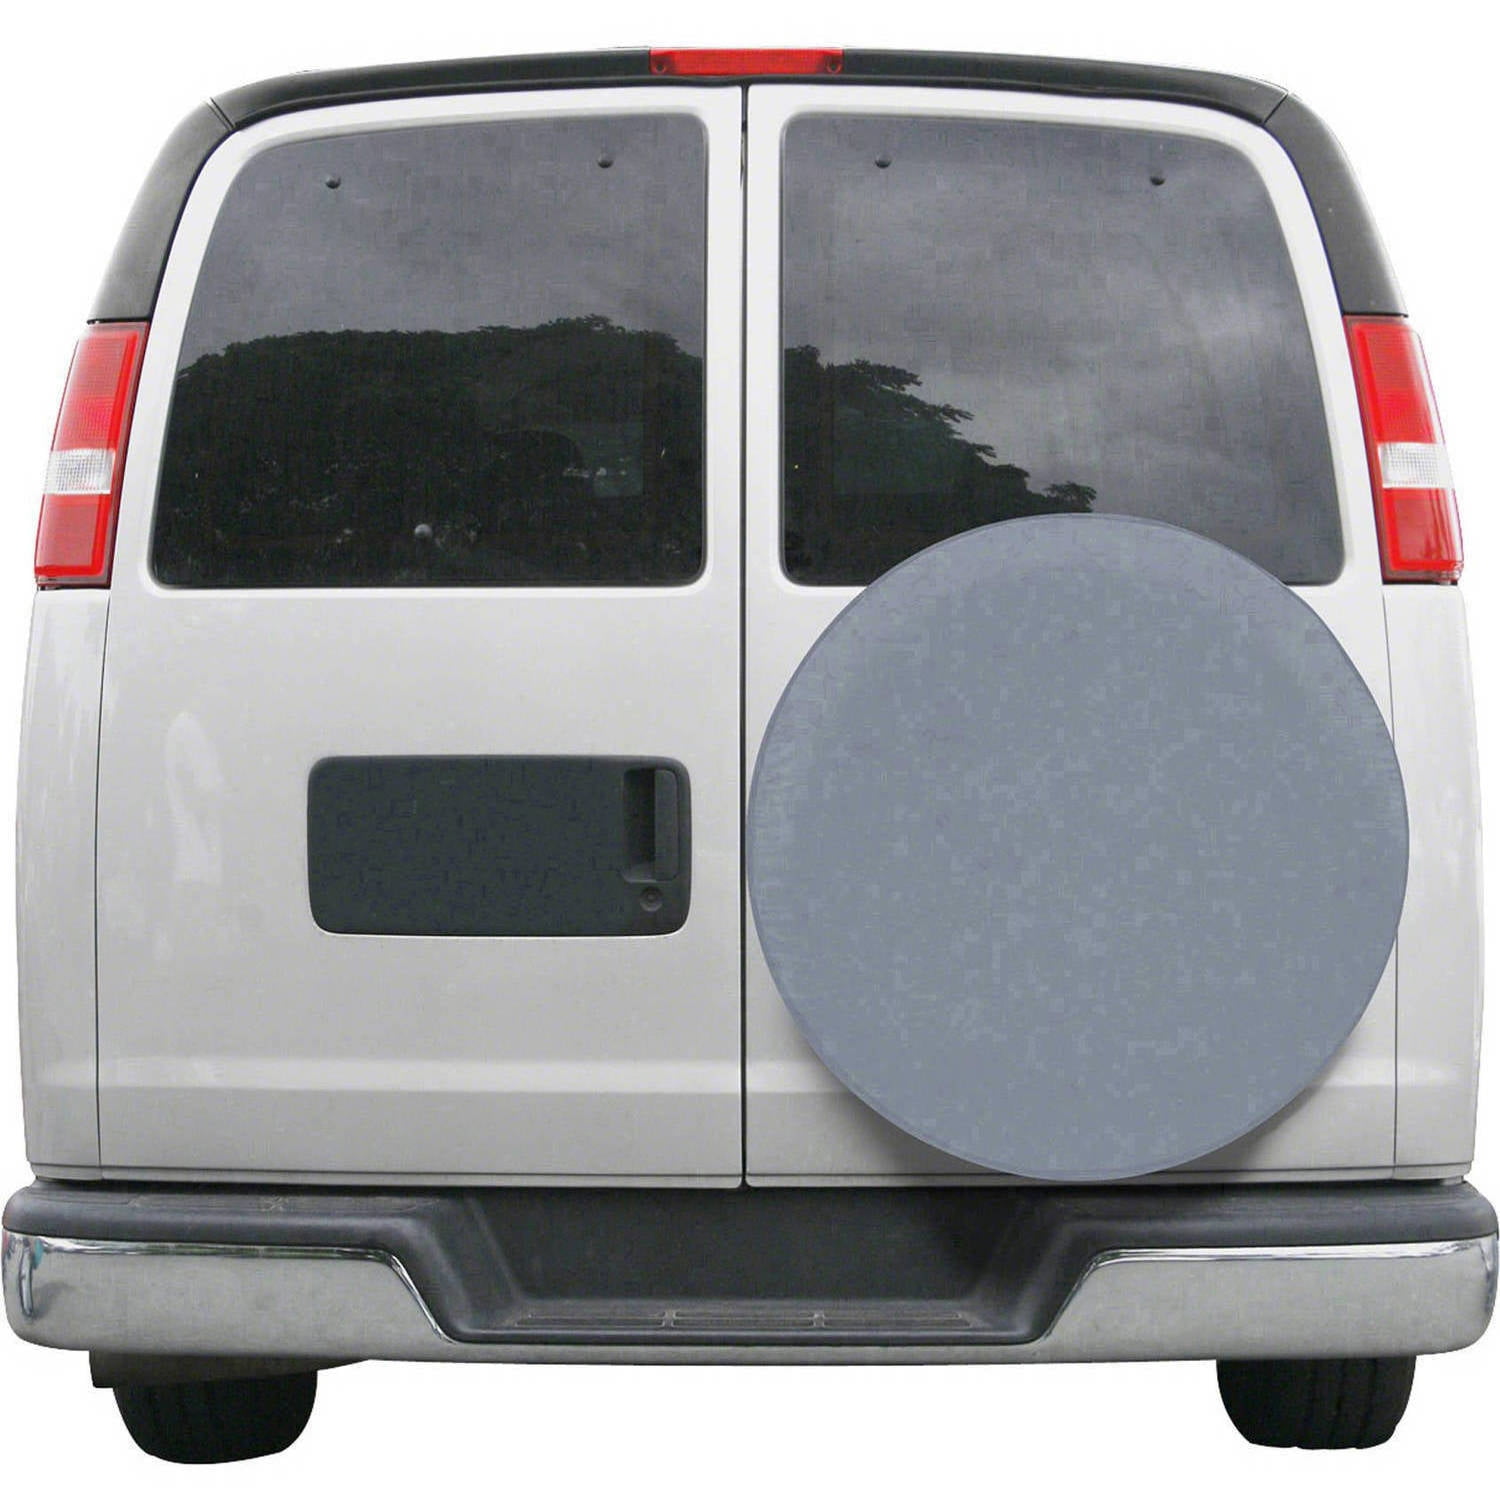 Dizzy-K Boston Terrier Spare Tire Cover Polyester Waterproof Adjustable Universal Portable Wheel Covers Fits for Jeep Trailer RV SUV Truck Camper Travel Trailer Accessories 14 15 16 17 